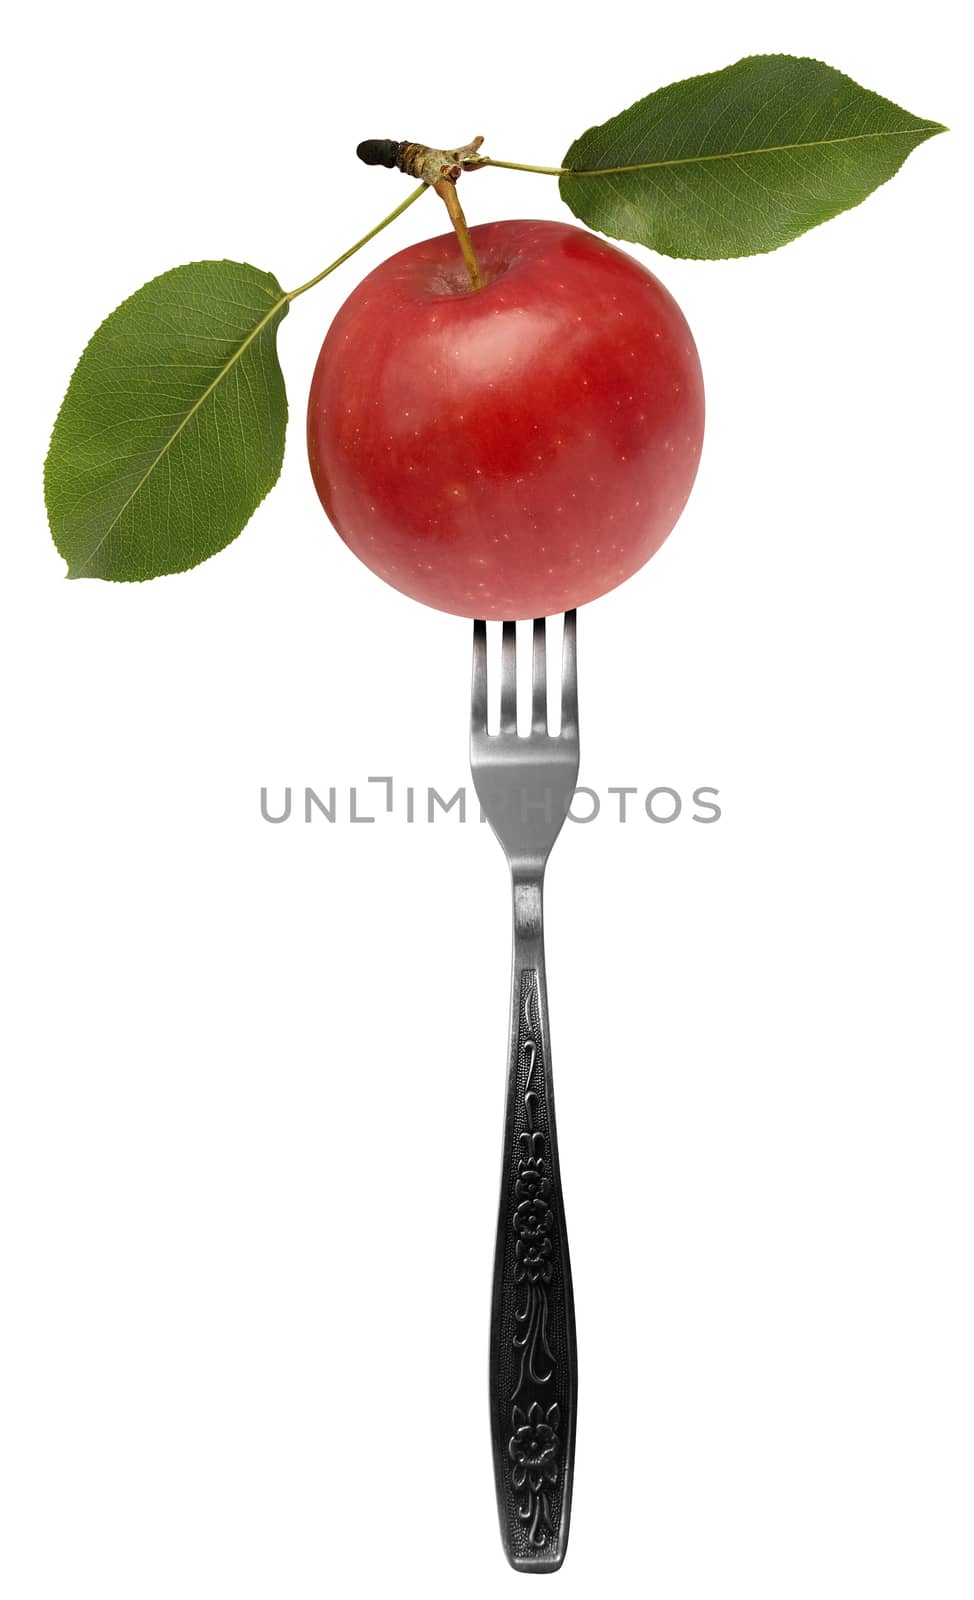 Red apple on fork isolated on a white background.